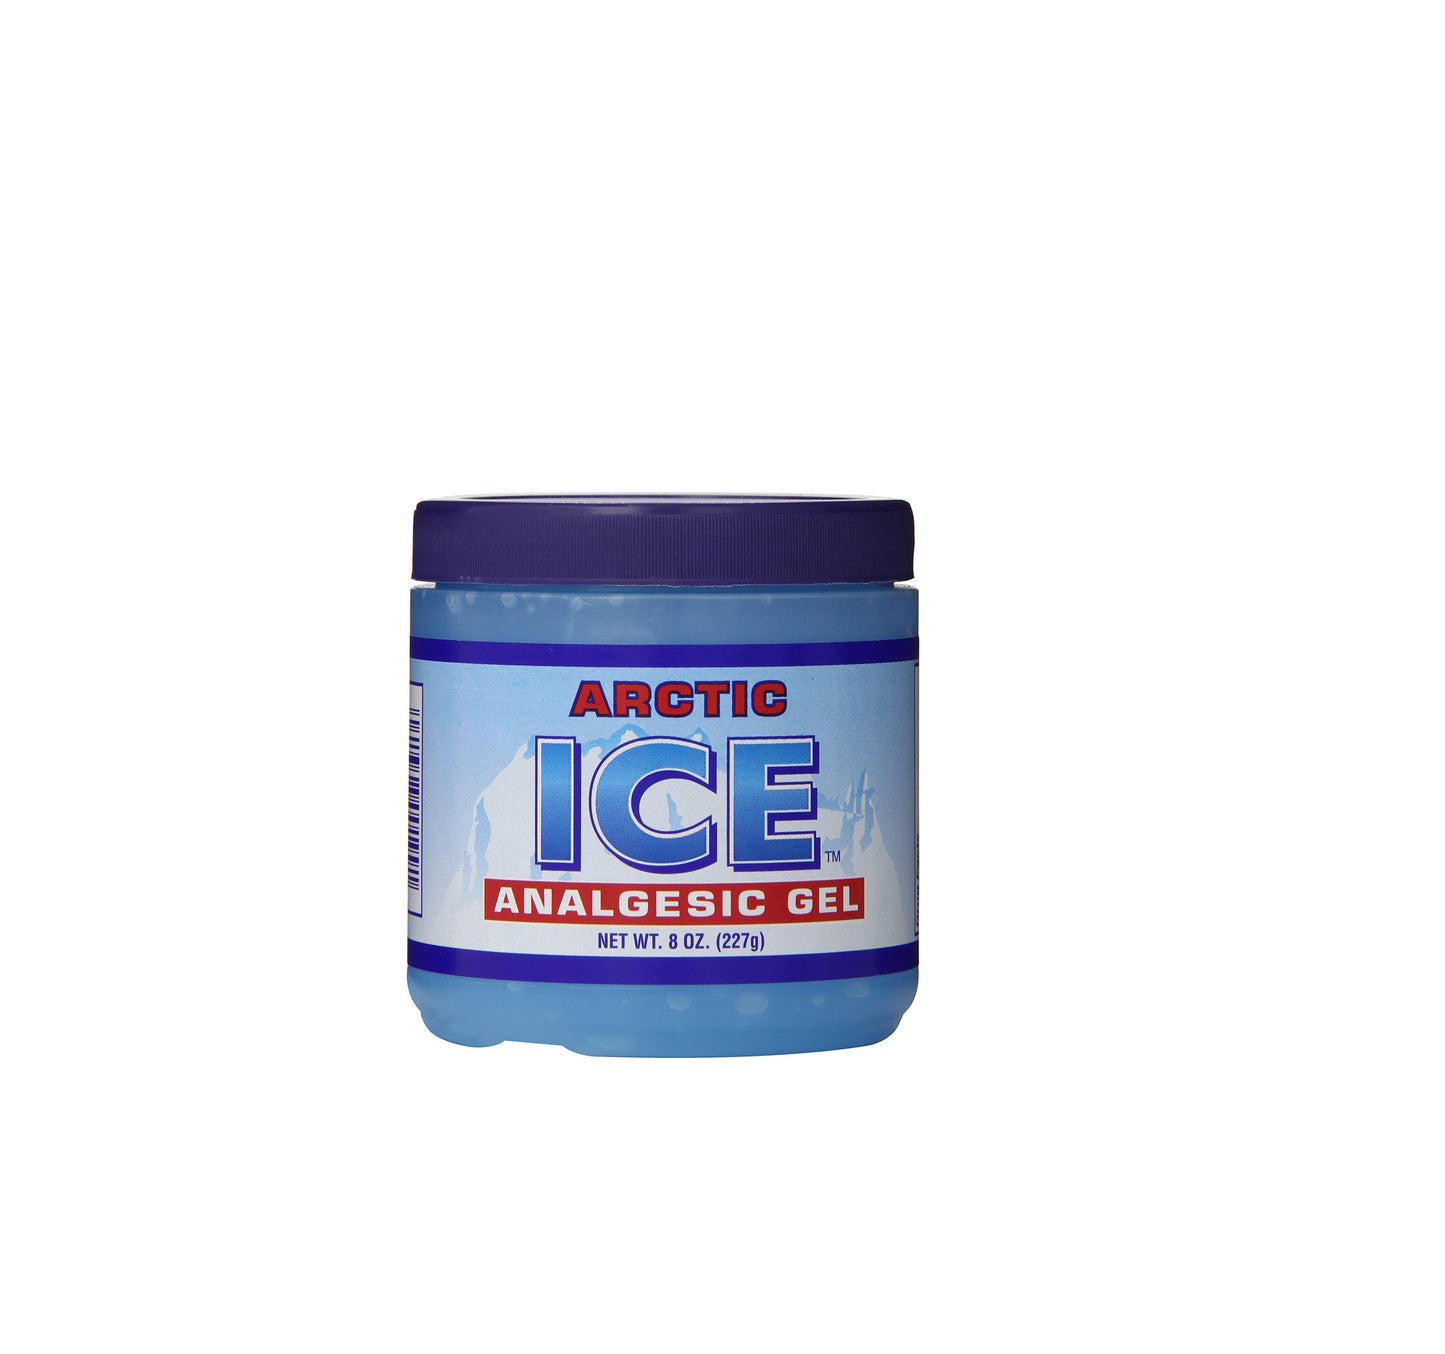 Arctic ICE Pain Relieving Gel